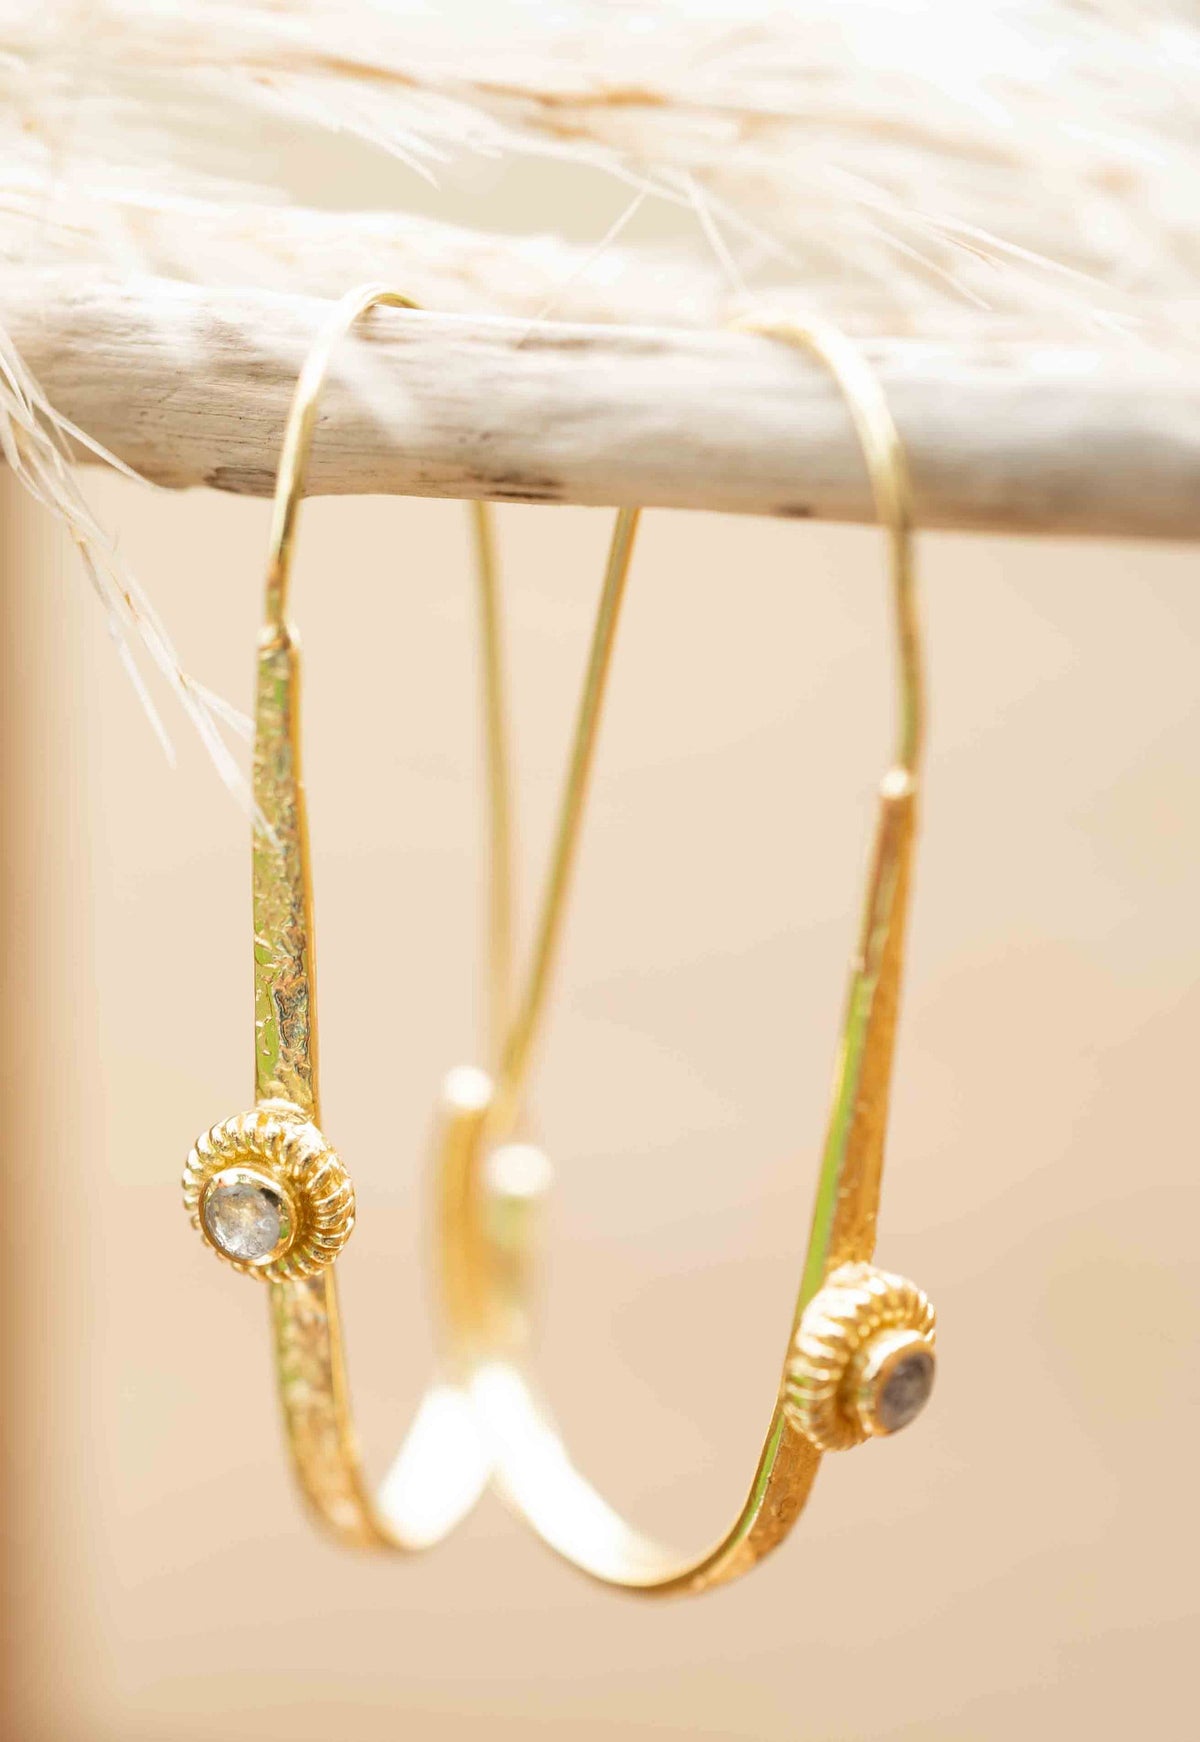 Moonstone Earrings Gold Plated 18k  * Dangle * Gemstone * Hammered * Statement  * Every day * ByCila * Boho * Bohemian *Gift BJE168